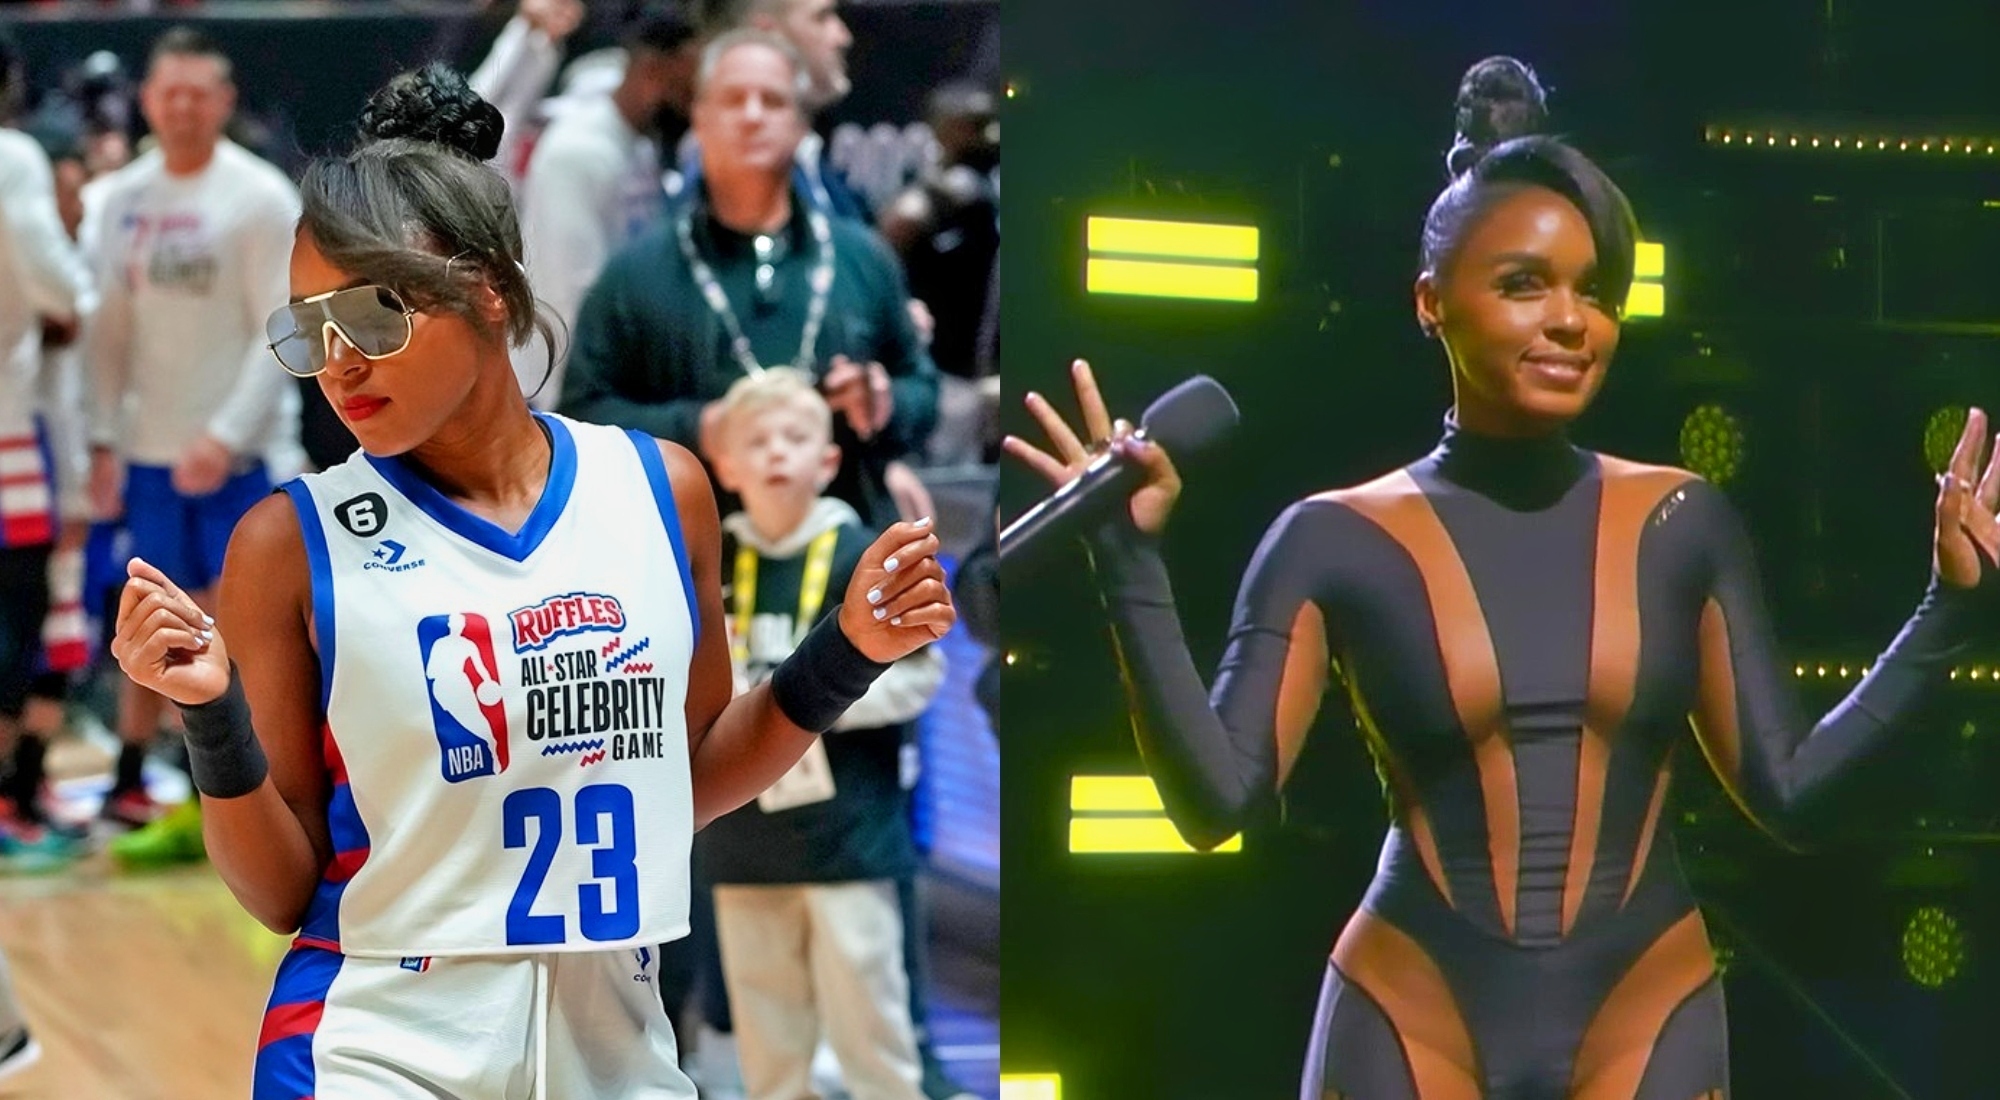 Janelle Monae Wore Incredibly Racy Outfit At Nba All Star Game